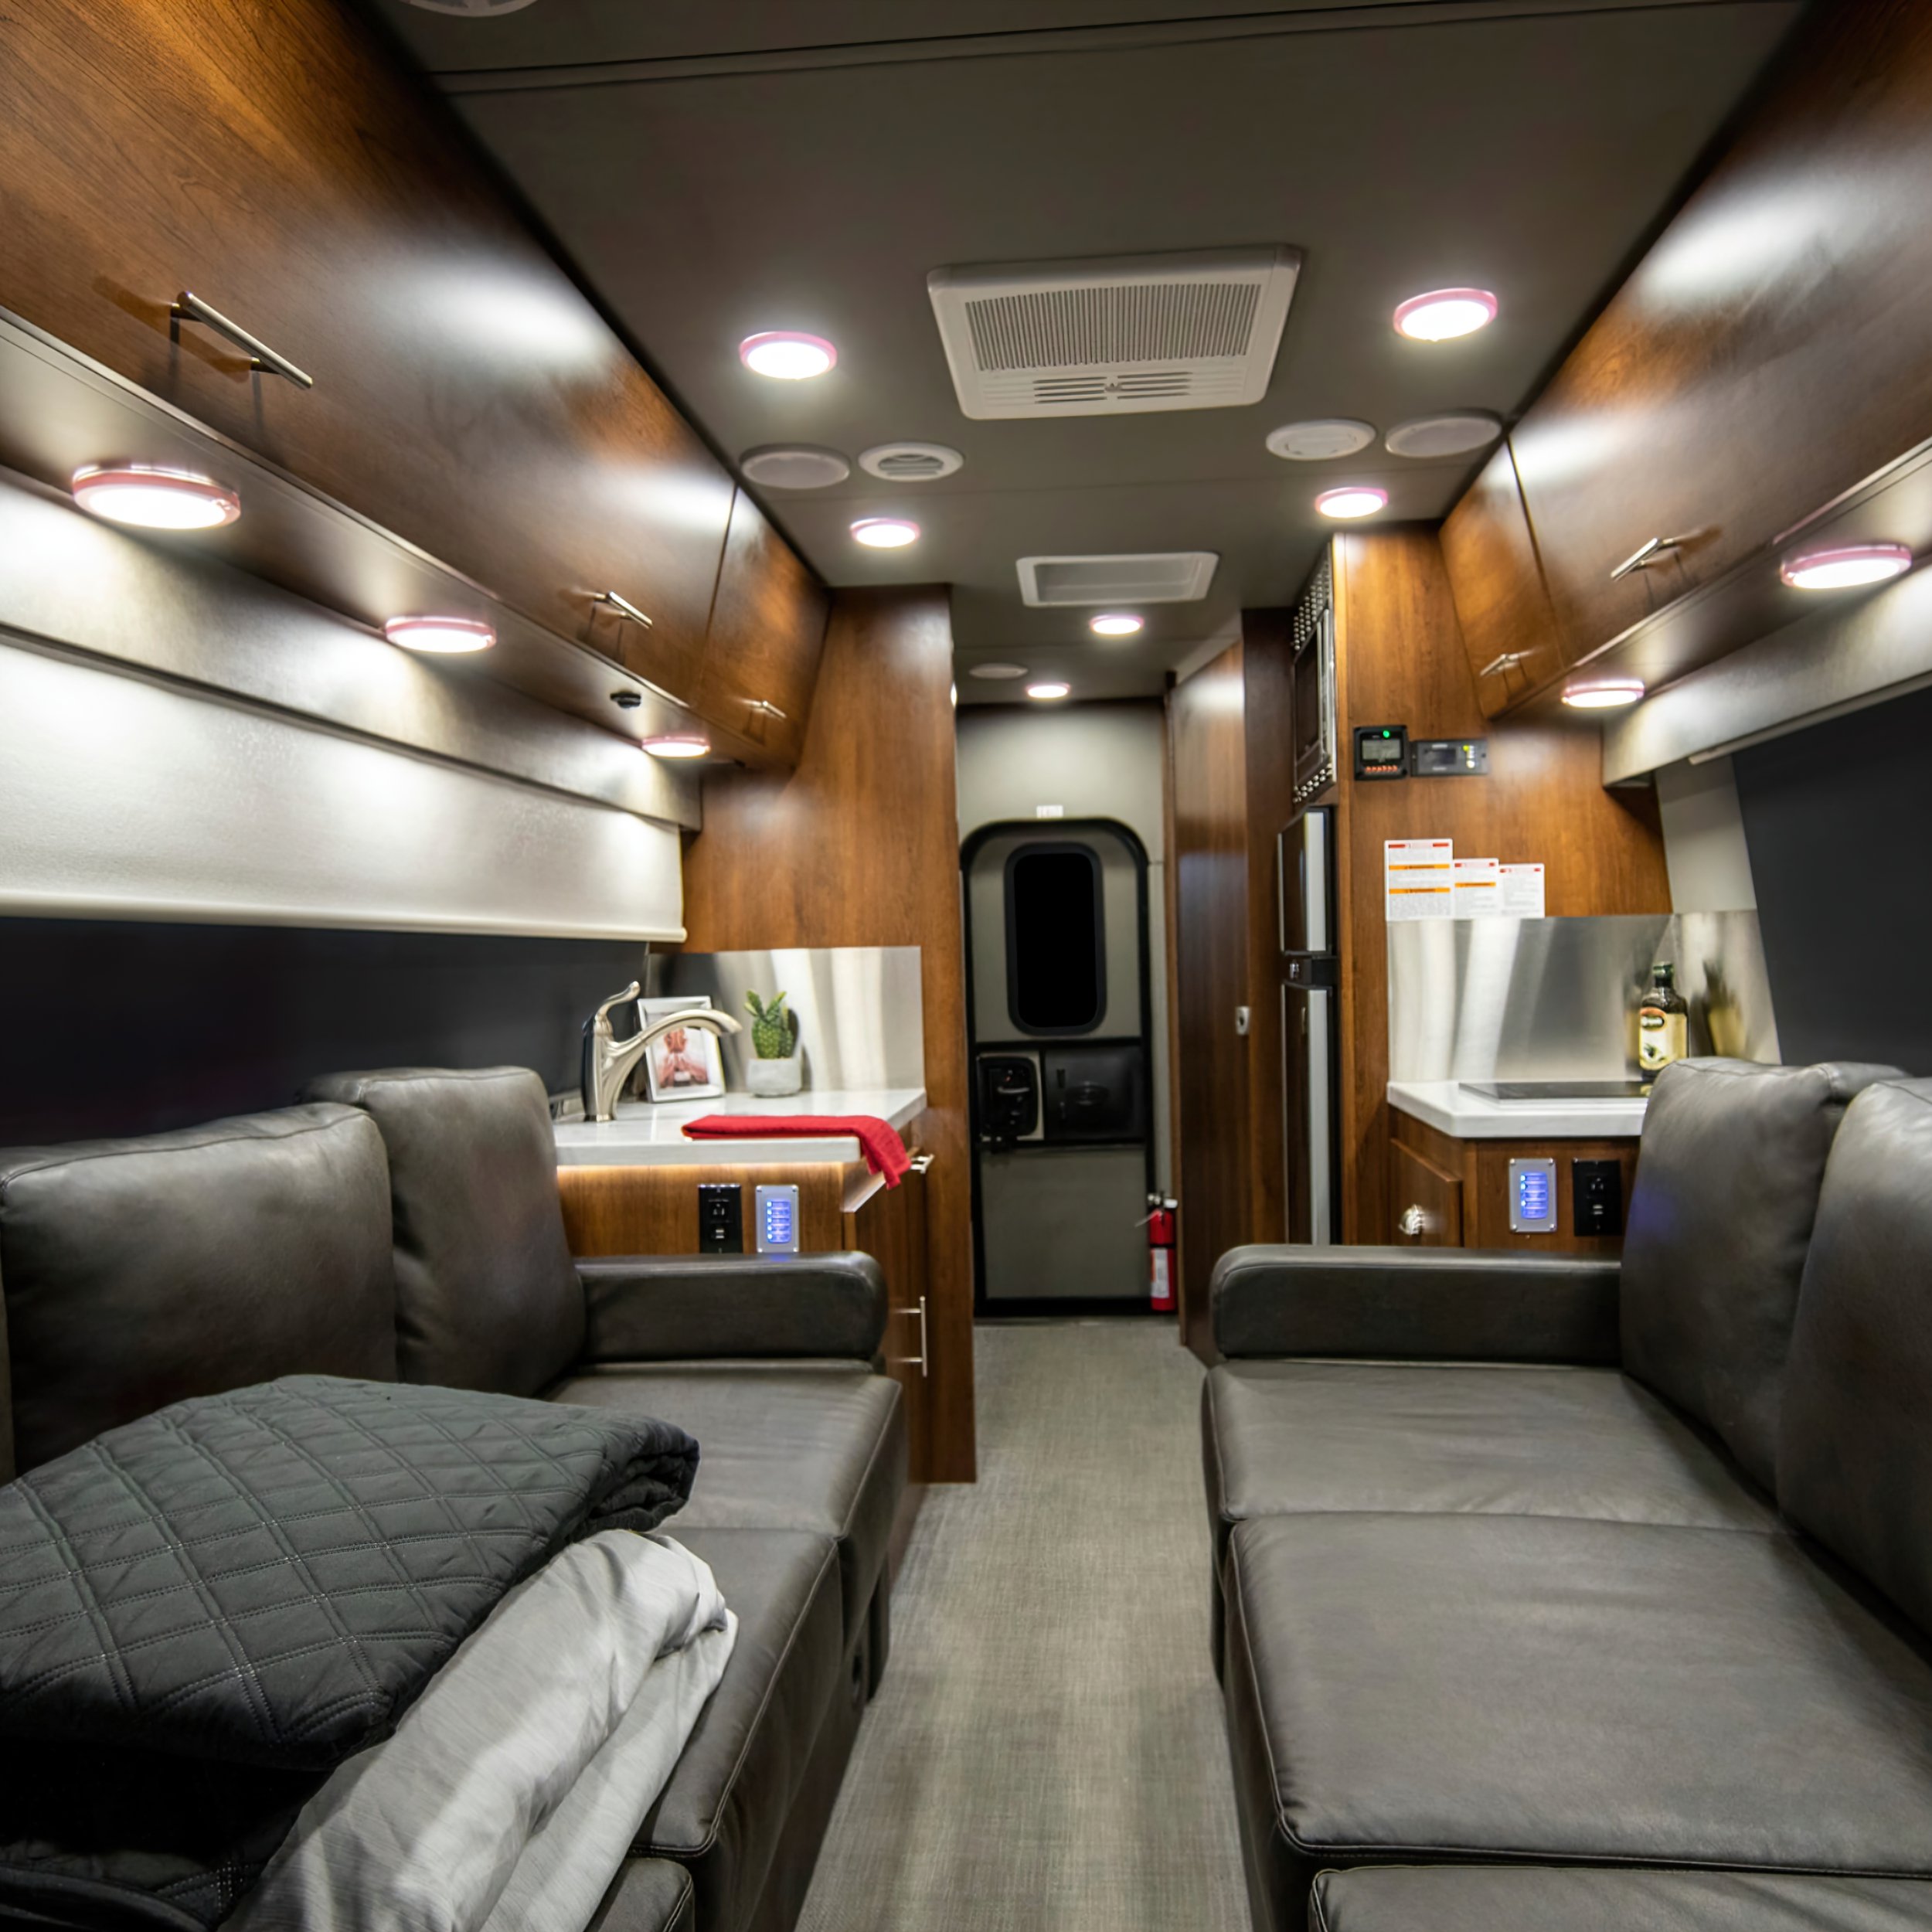  You'll notice the Summit Class C Motor Coach structure is slightly different than the others. The entrance, for instance, in the very rear opens to a closet on your left and a toilet room to your right.  Beyond that, you will see the shower and dual